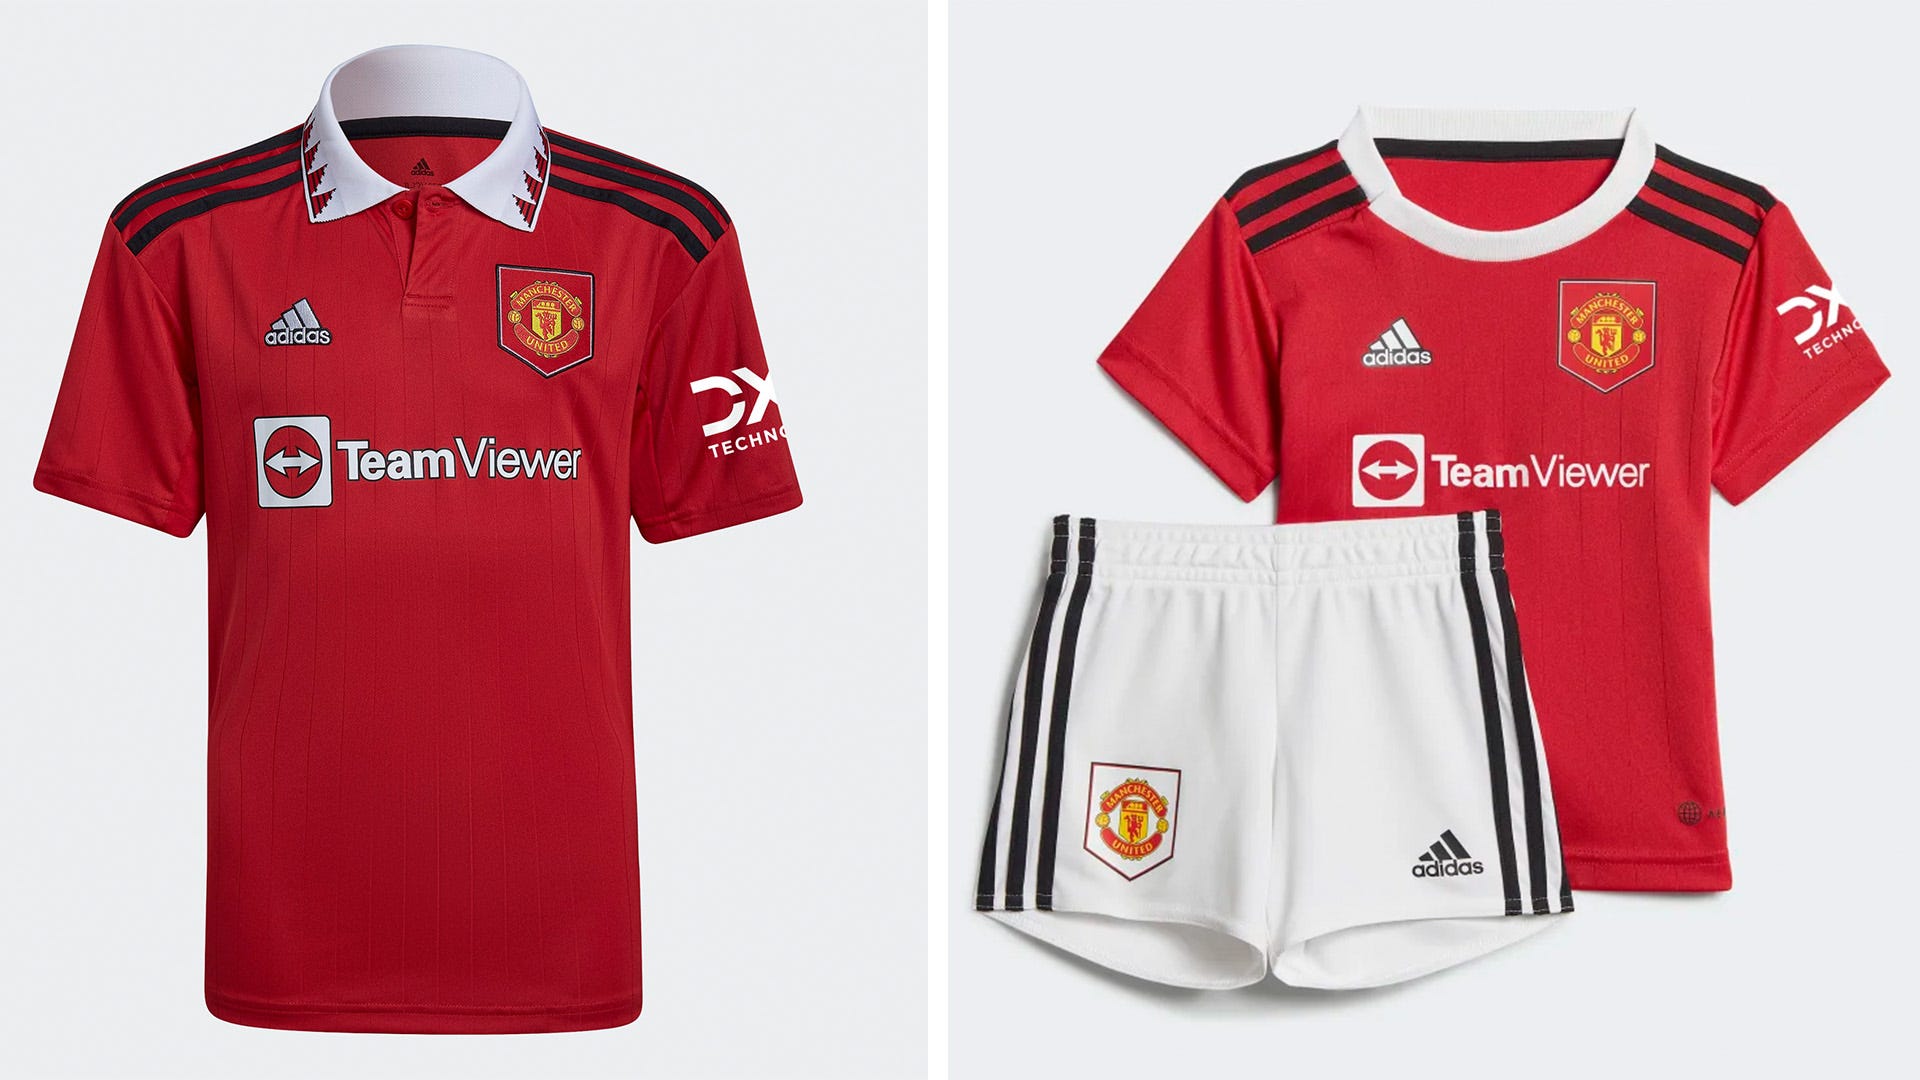 Manchester United unveil new black away kit inspired by iconic 90s